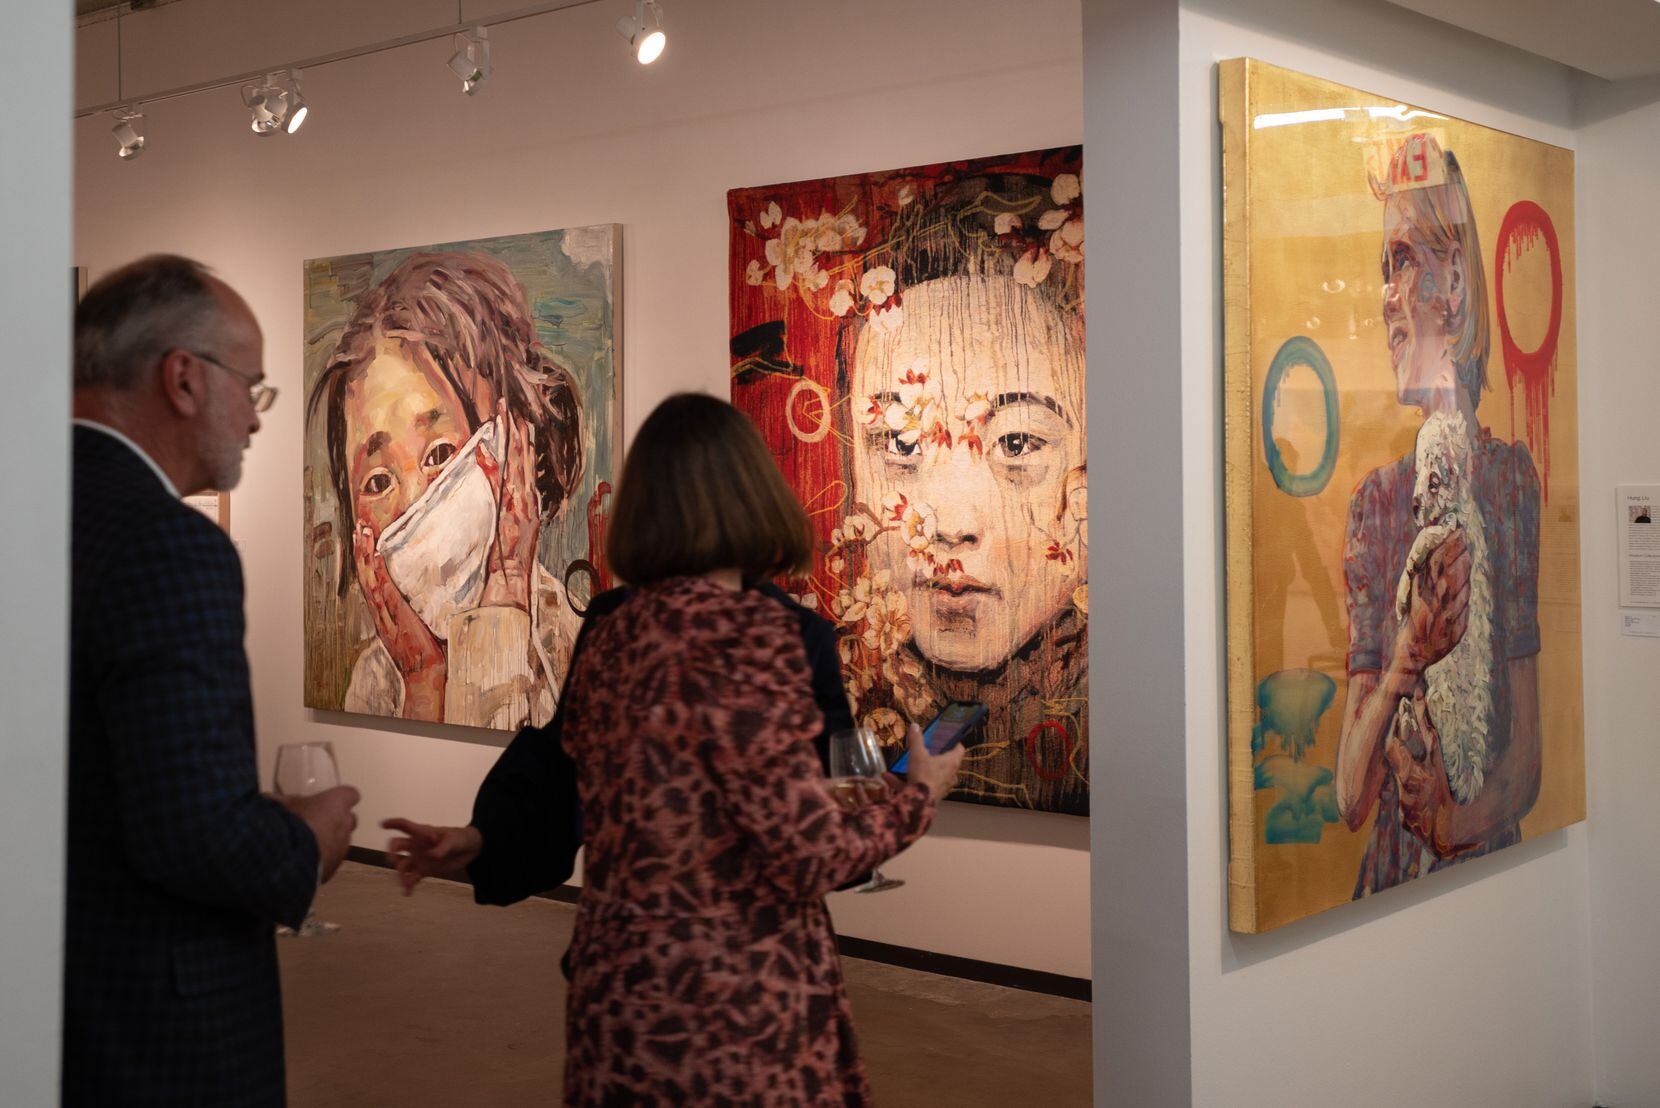 Visitors take in artwork from Turner Carroll Gallery of Santa Fe during opening night of the...